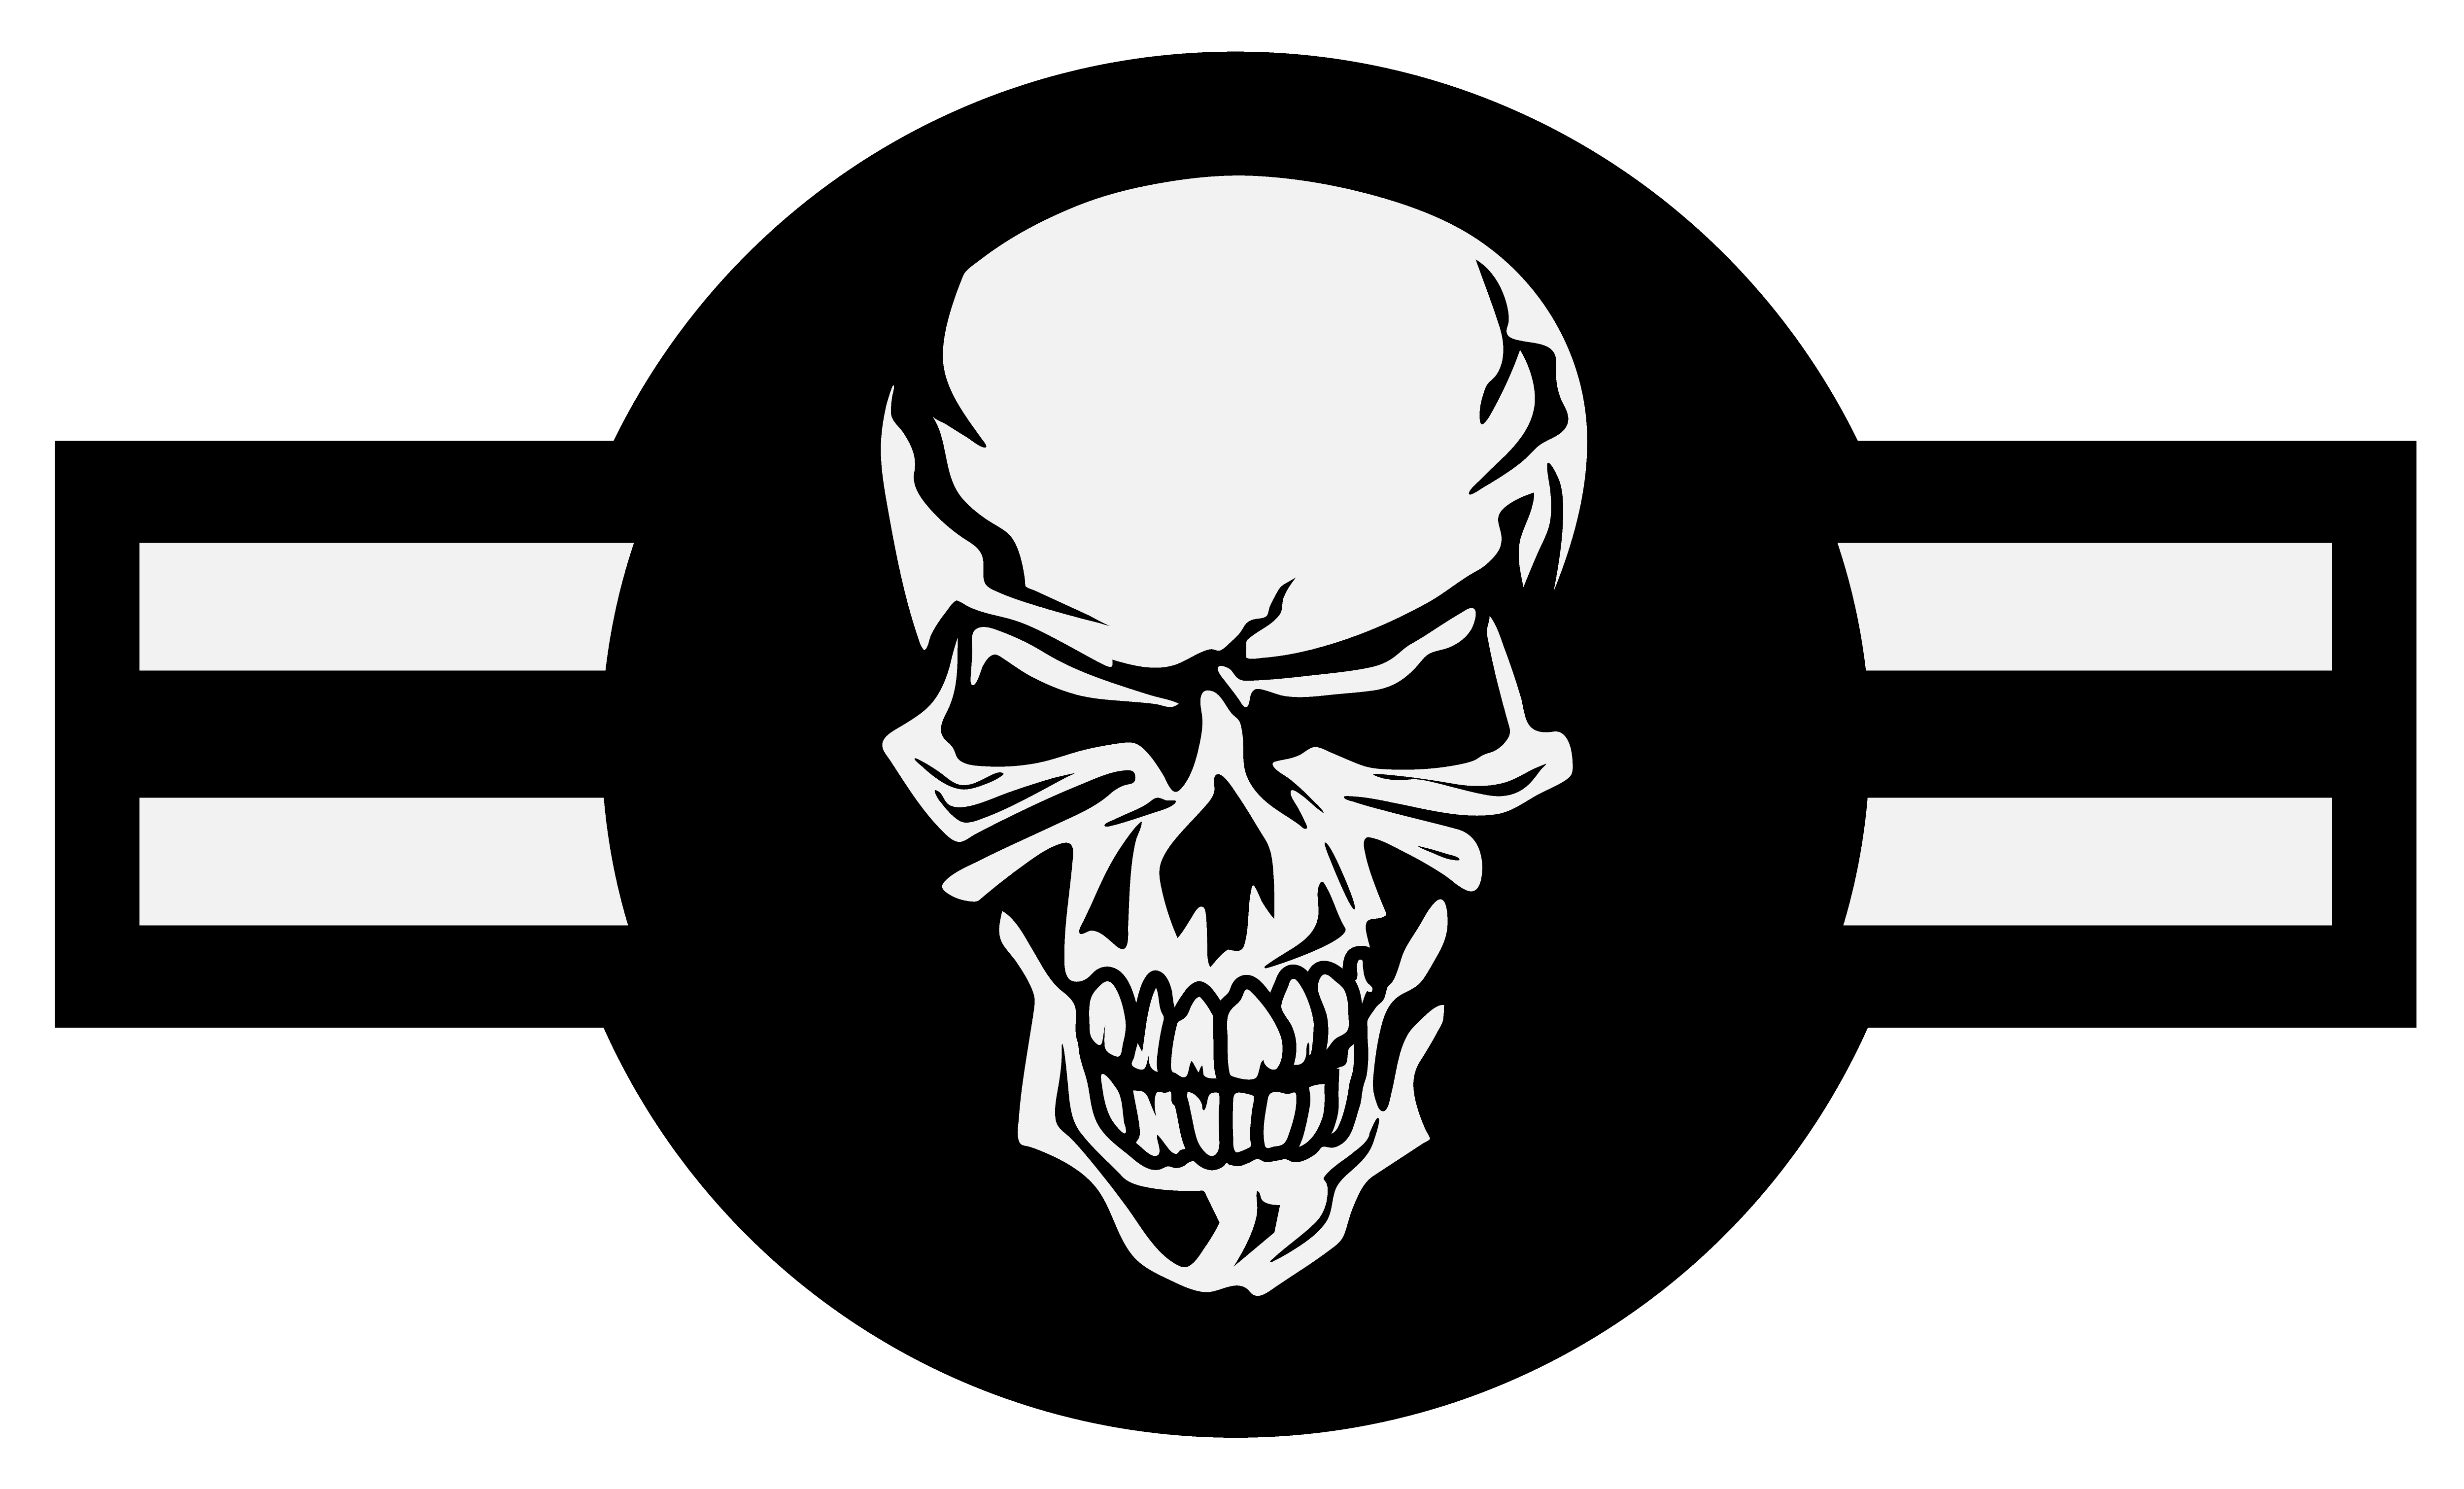 Military aircraft emblem with skull roundel vector illustration 491829